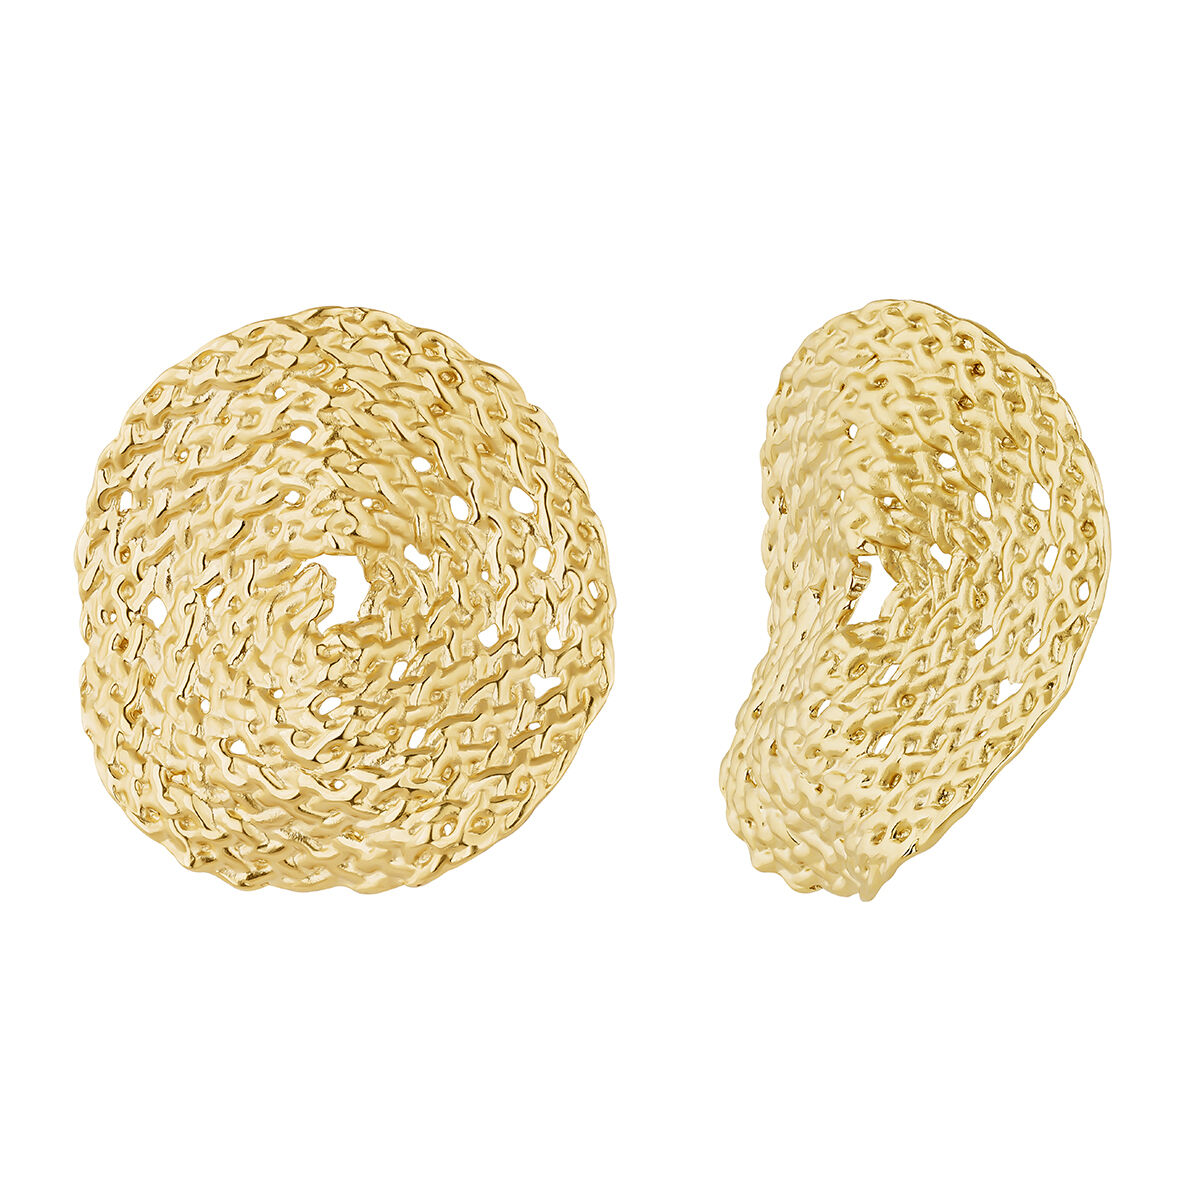 XL wicker-design round earrings in 18kt yellow gold-plated sterling silver, J04415-02, hi-res